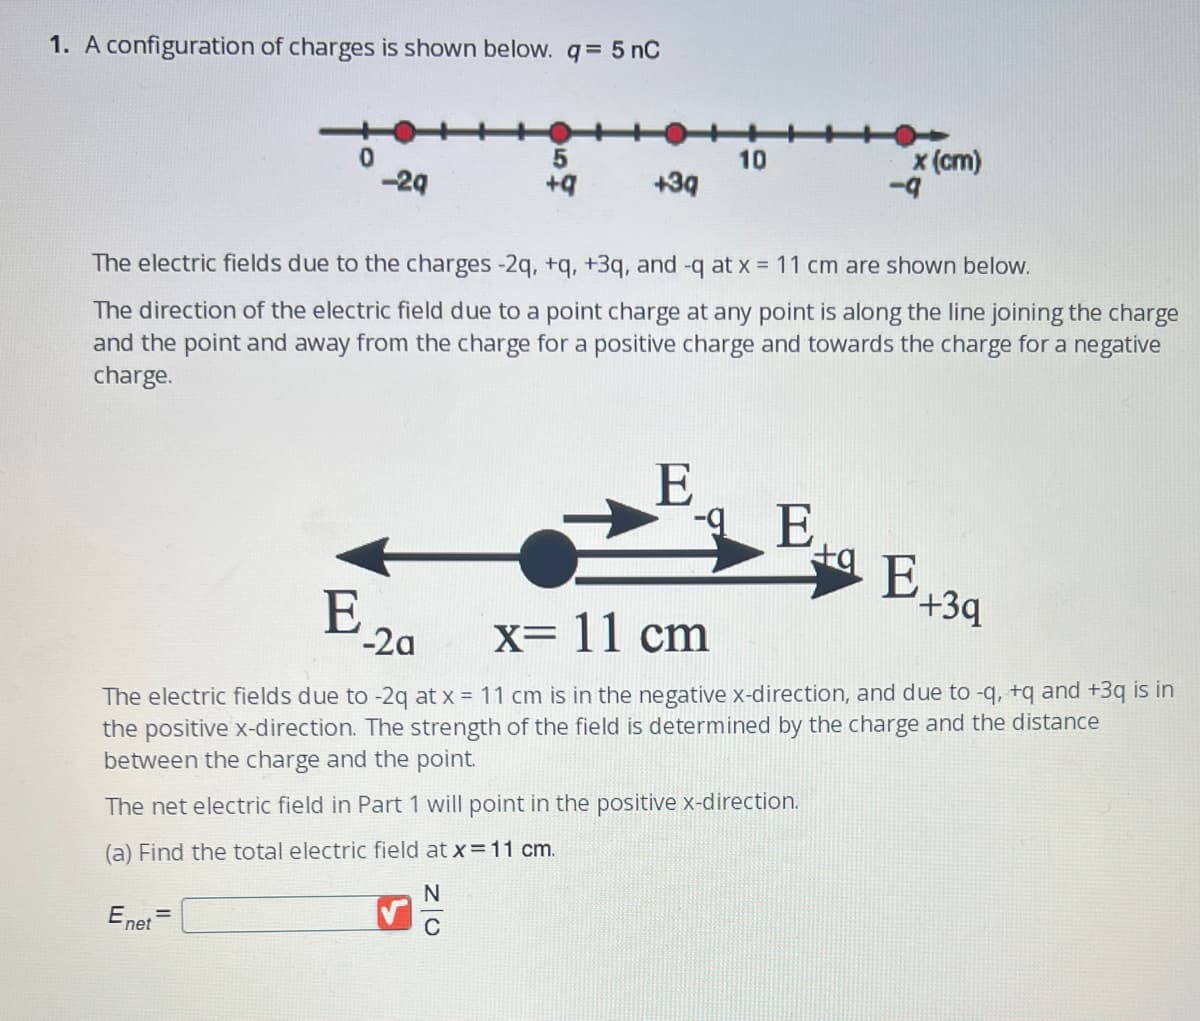 1. A configuration of charges is shown below. q = 5 nC
0
Enet
-2q
=
5
+q
+3q
10
The electric fields due to the charges -2q, +q, +3q, and -q at x = 11 cm are shown below.
The direction of the electric field due to a point charge at any point is along the line joining the charge
and the point and away from the charge for a positive charge and towards the charge for a negative
charge.
E
x (cm)
-E
-9
E 20
x= 11 cm
The electric fields due to -2q at x = 11 cm is in the negative x-direction, and due to -q, +q and +3q is in
the positive x-direction. The strength of the field is determined by the charge and the distance
between the charge and the point.
The net electric field in Part 1 will point in the positive x-direction.
(a) Find the total electric field at x = 11 cm.
N
C
ta E
E +34